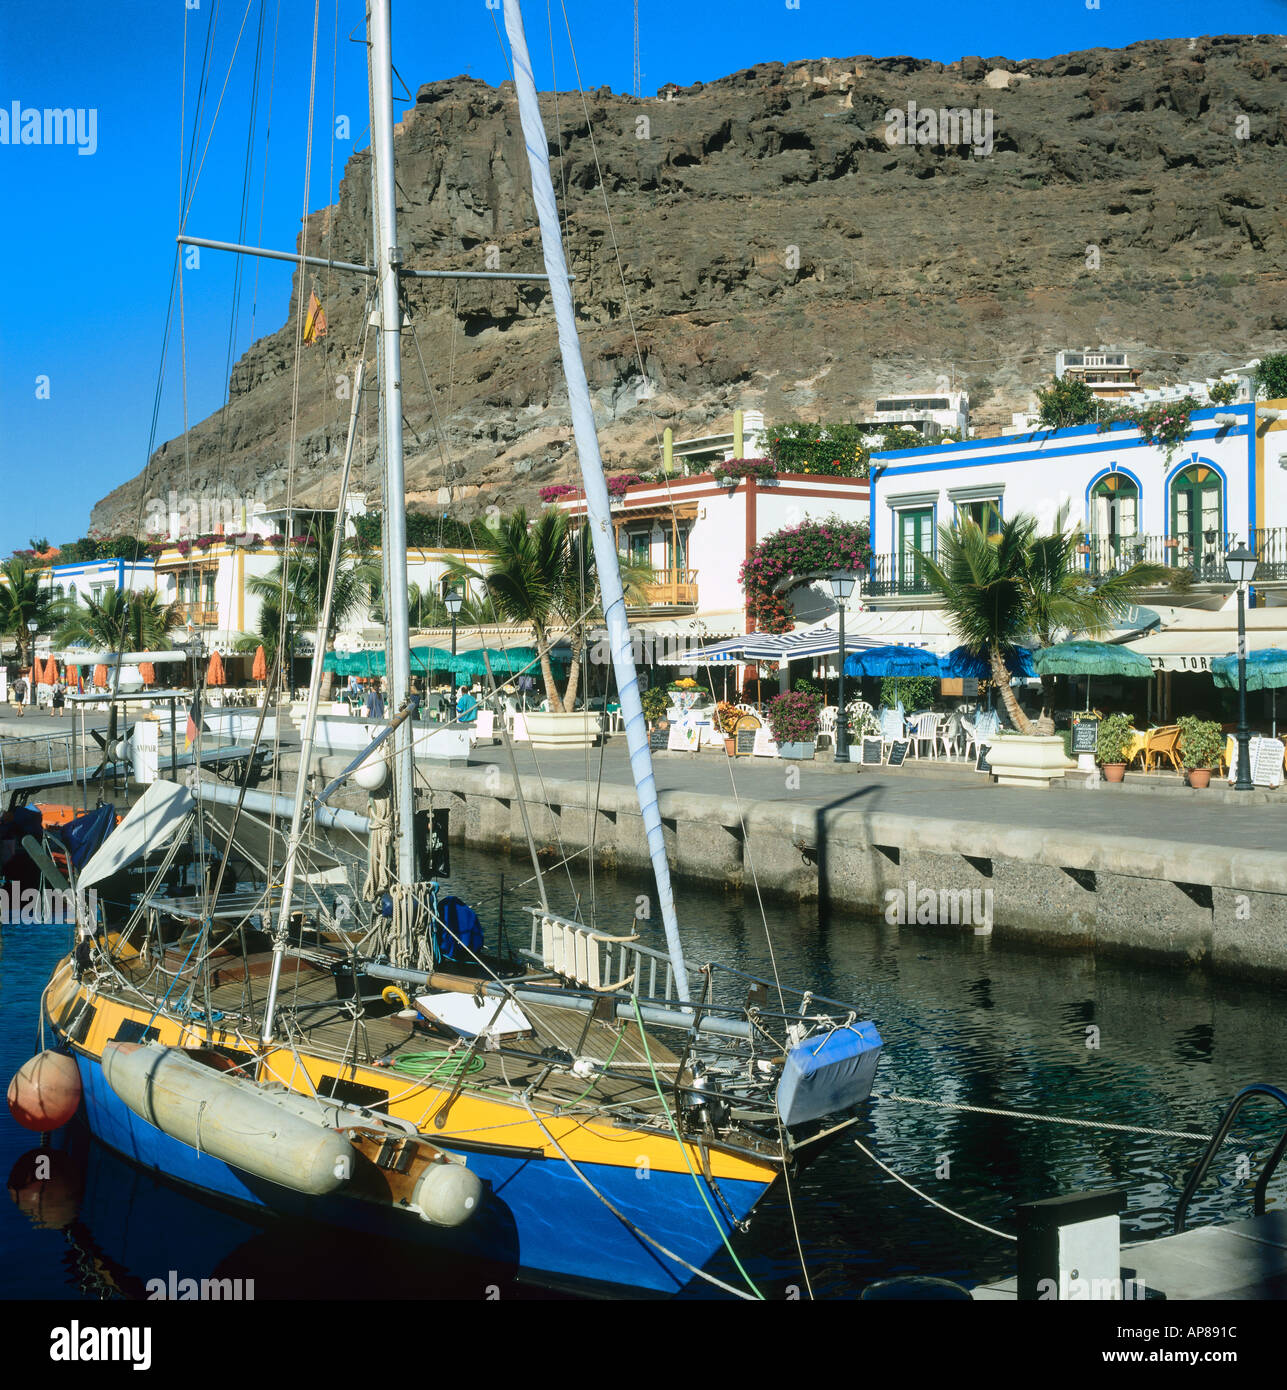 Close of a sailboat with houses in the background, Puerto de Mogan, Gran Canaria, Canary Islands, Spain Stock Photo